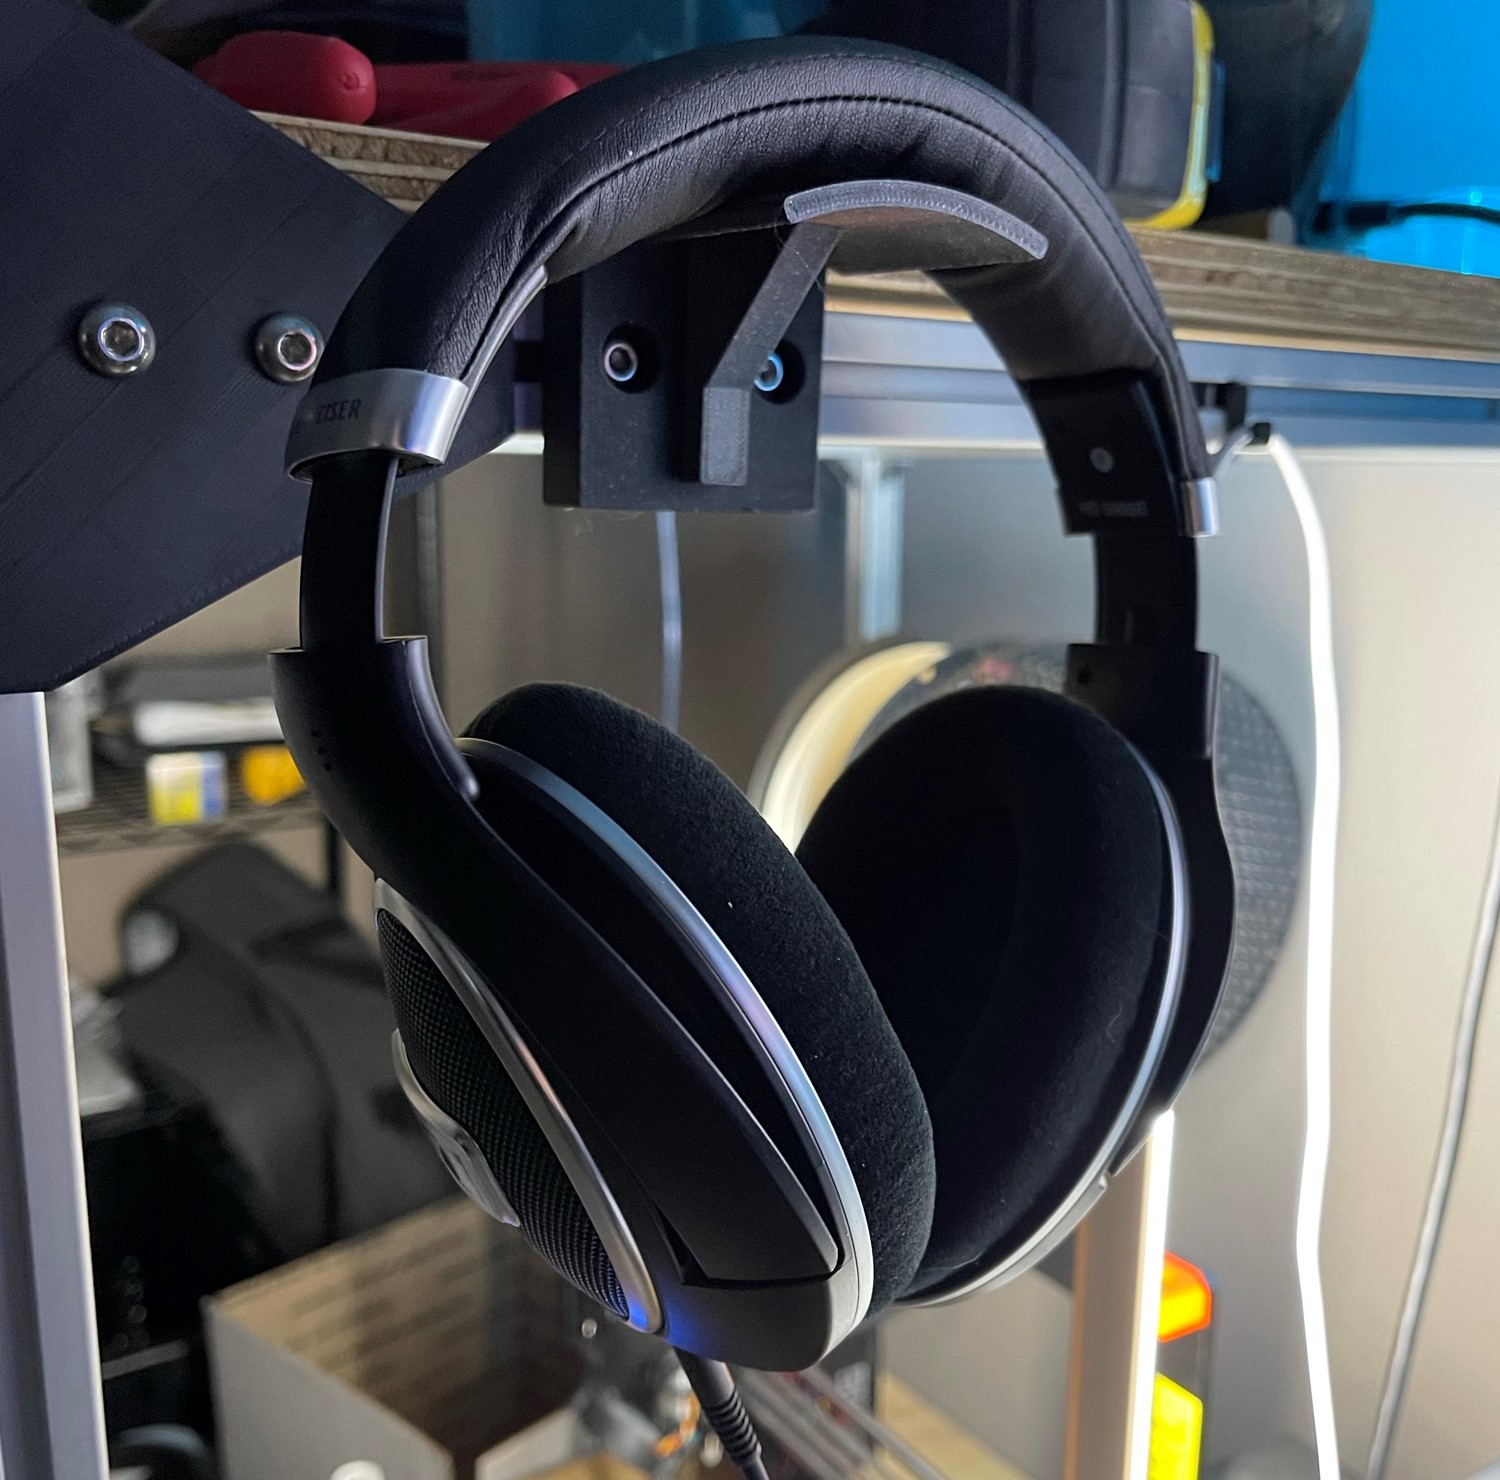 Headphone Holder for 80/20 extrusion (or wall)